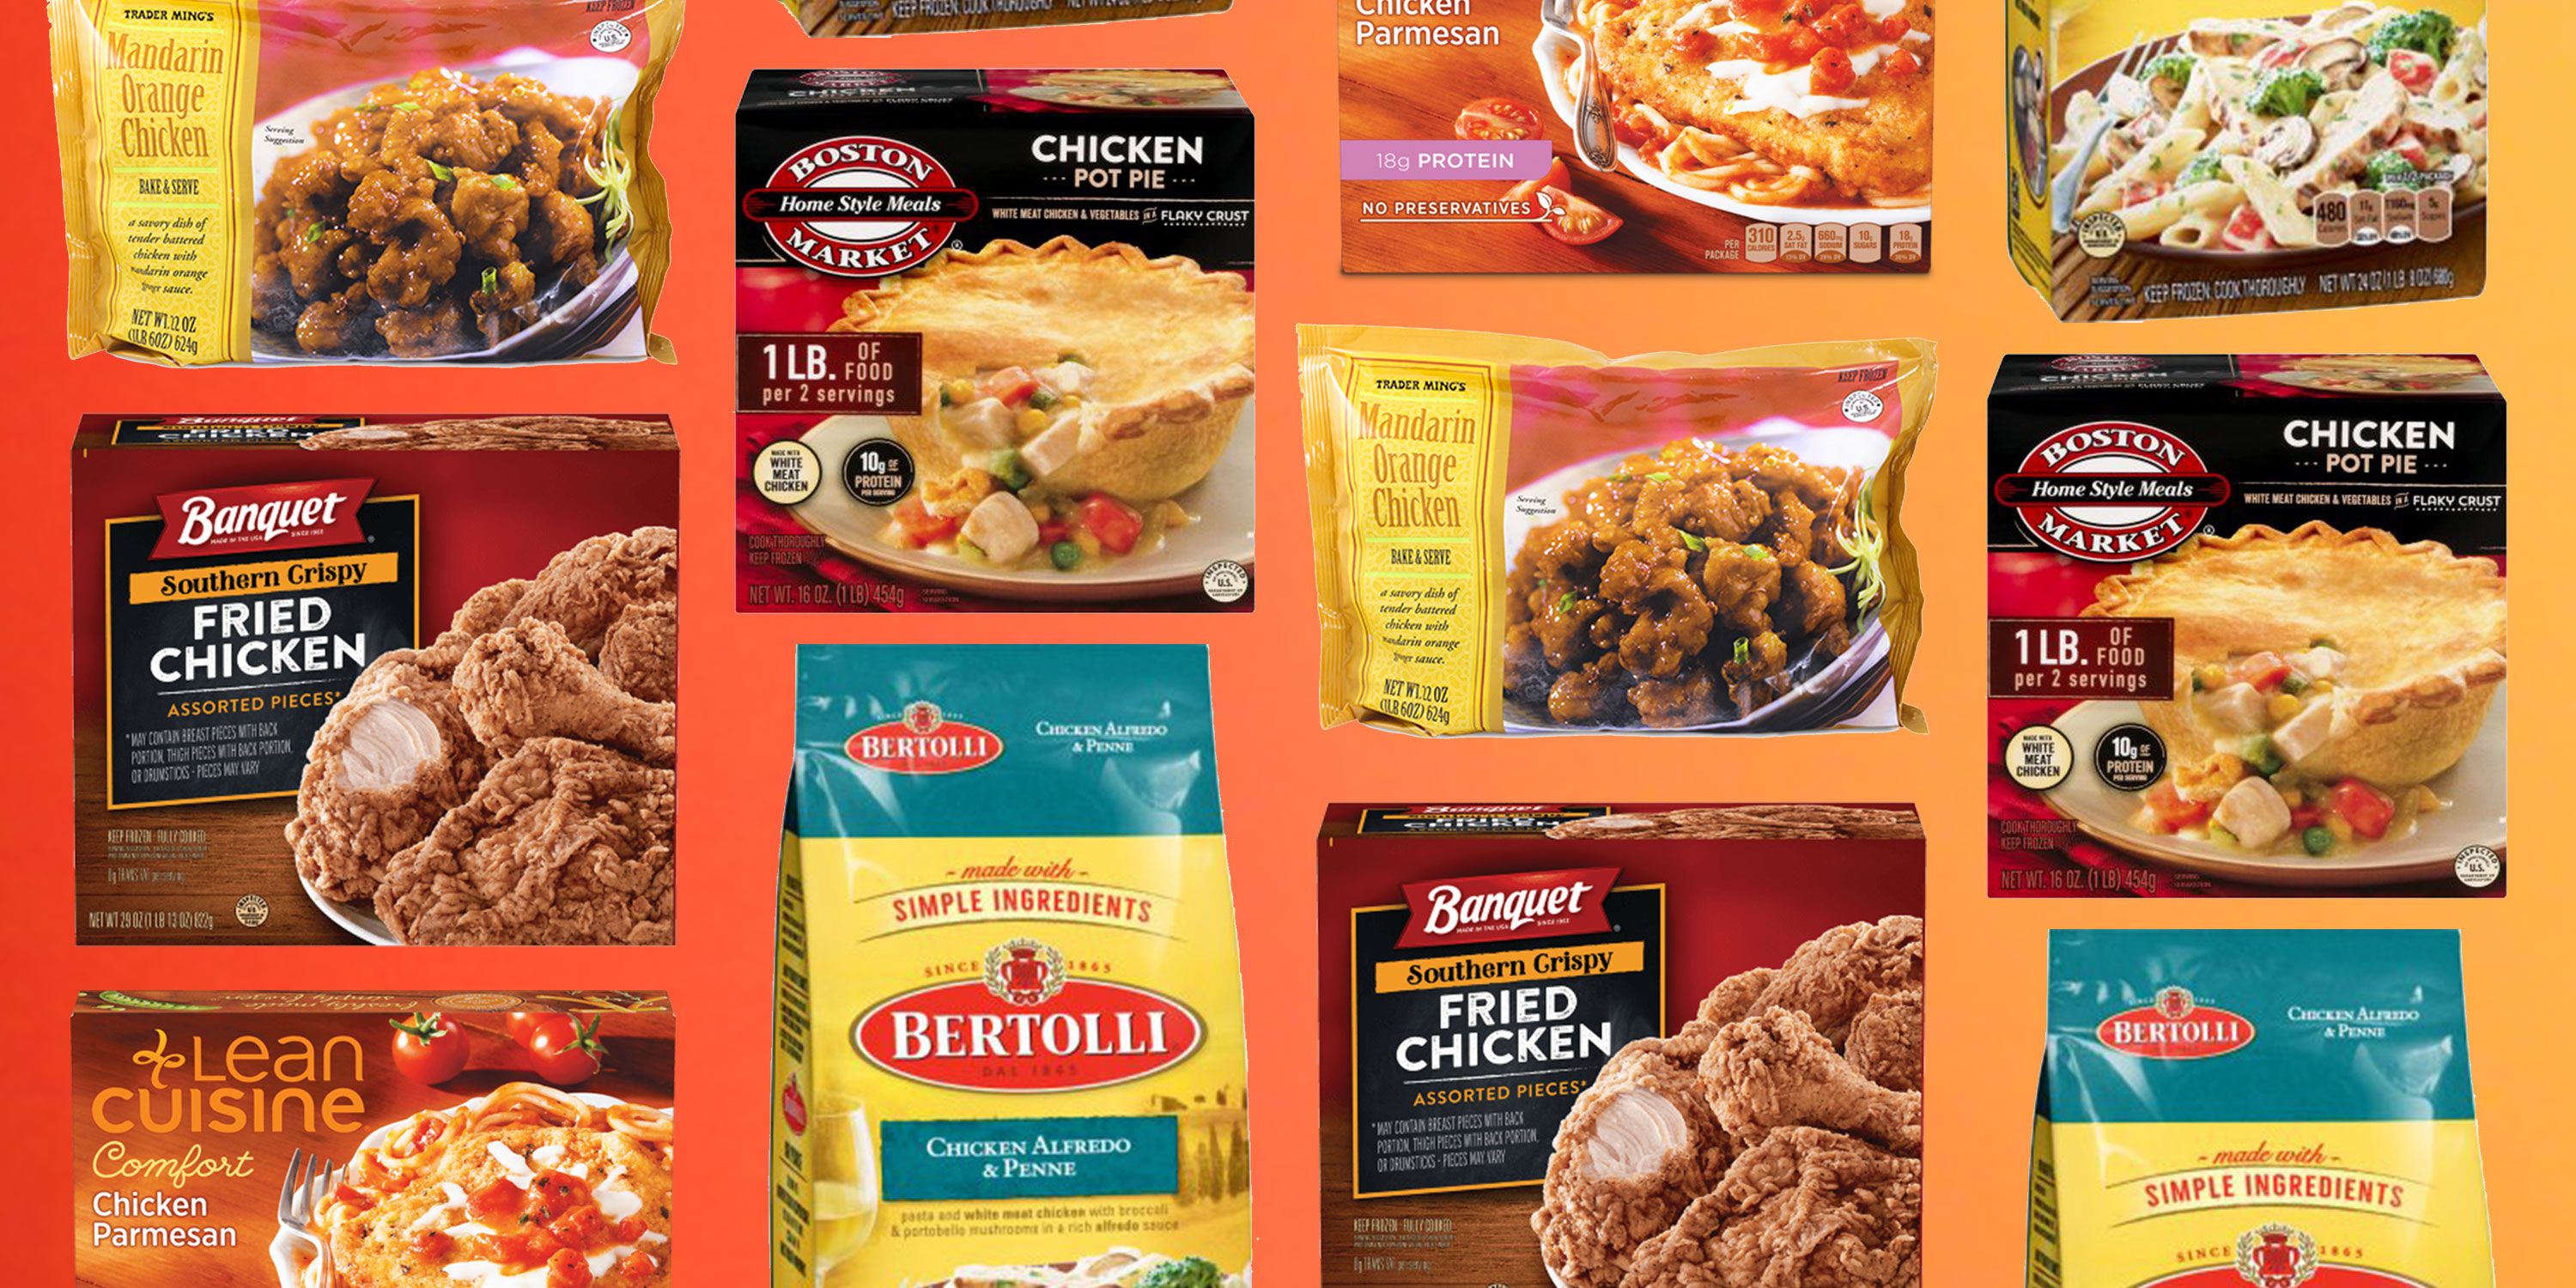 The Best Frozen Foods to Get at a Grocery Store, According to Chefs